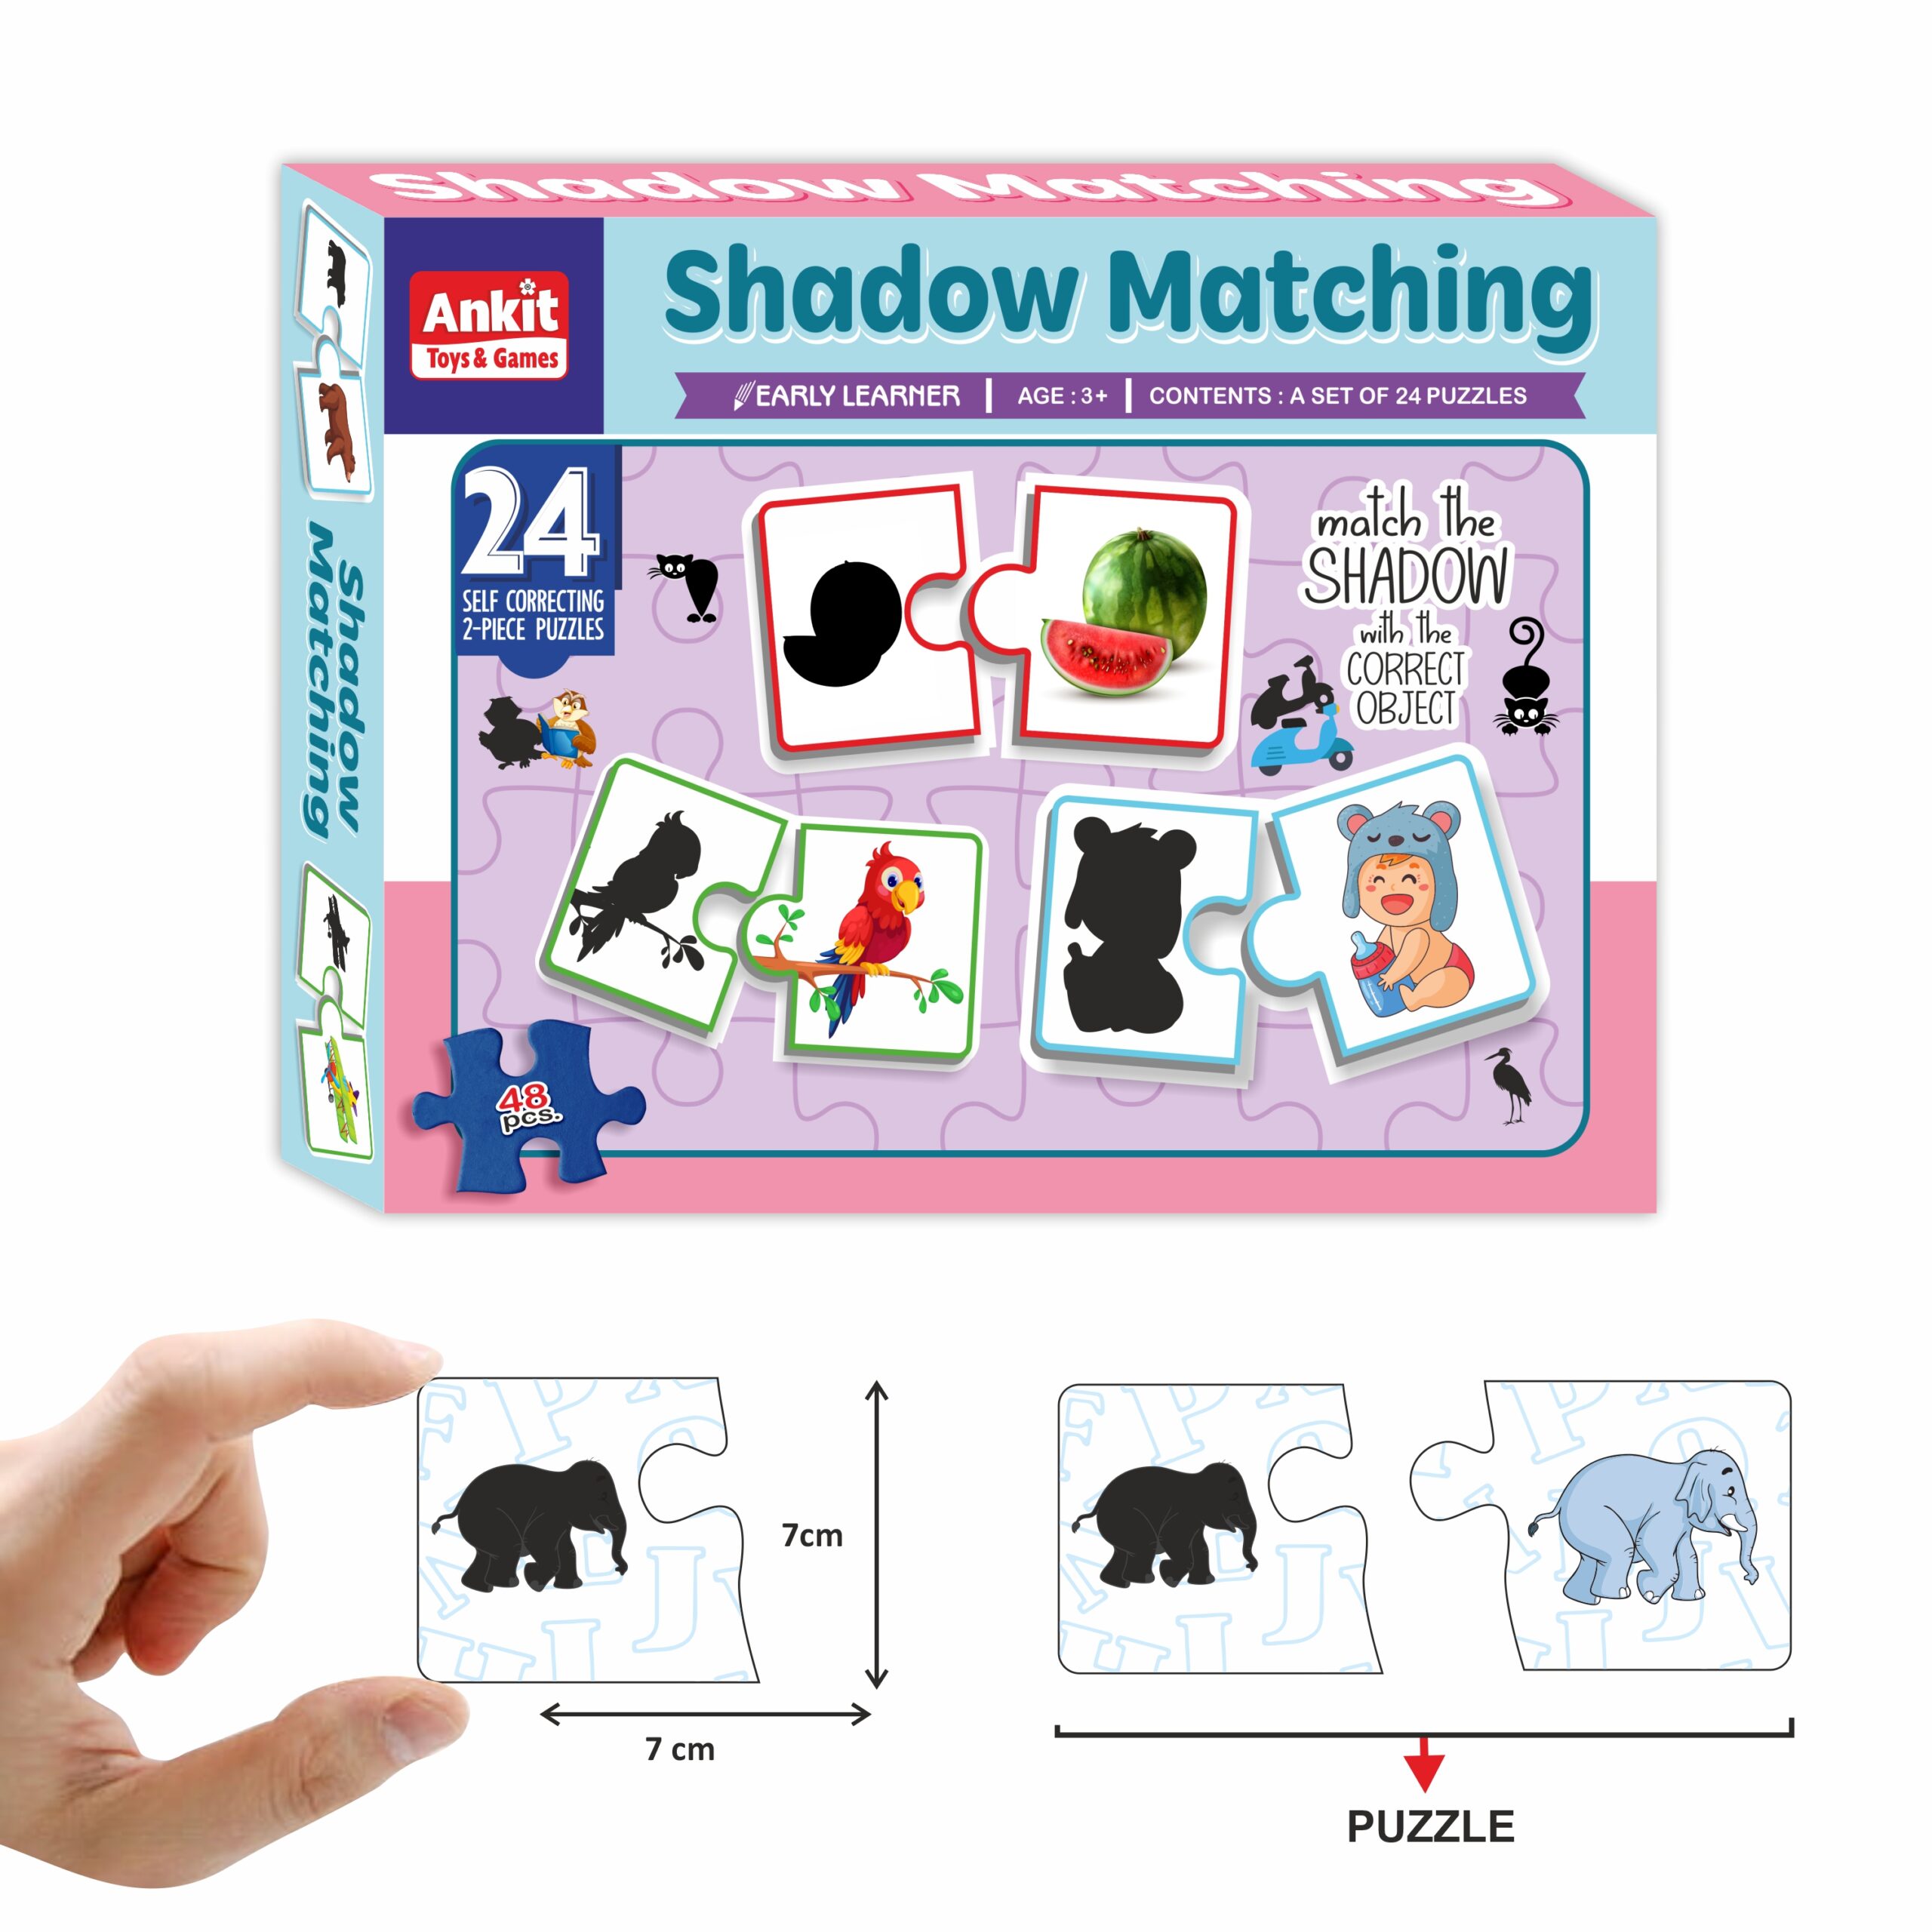 Ankit Toys Shadow Matching Jigsaw Puzzle